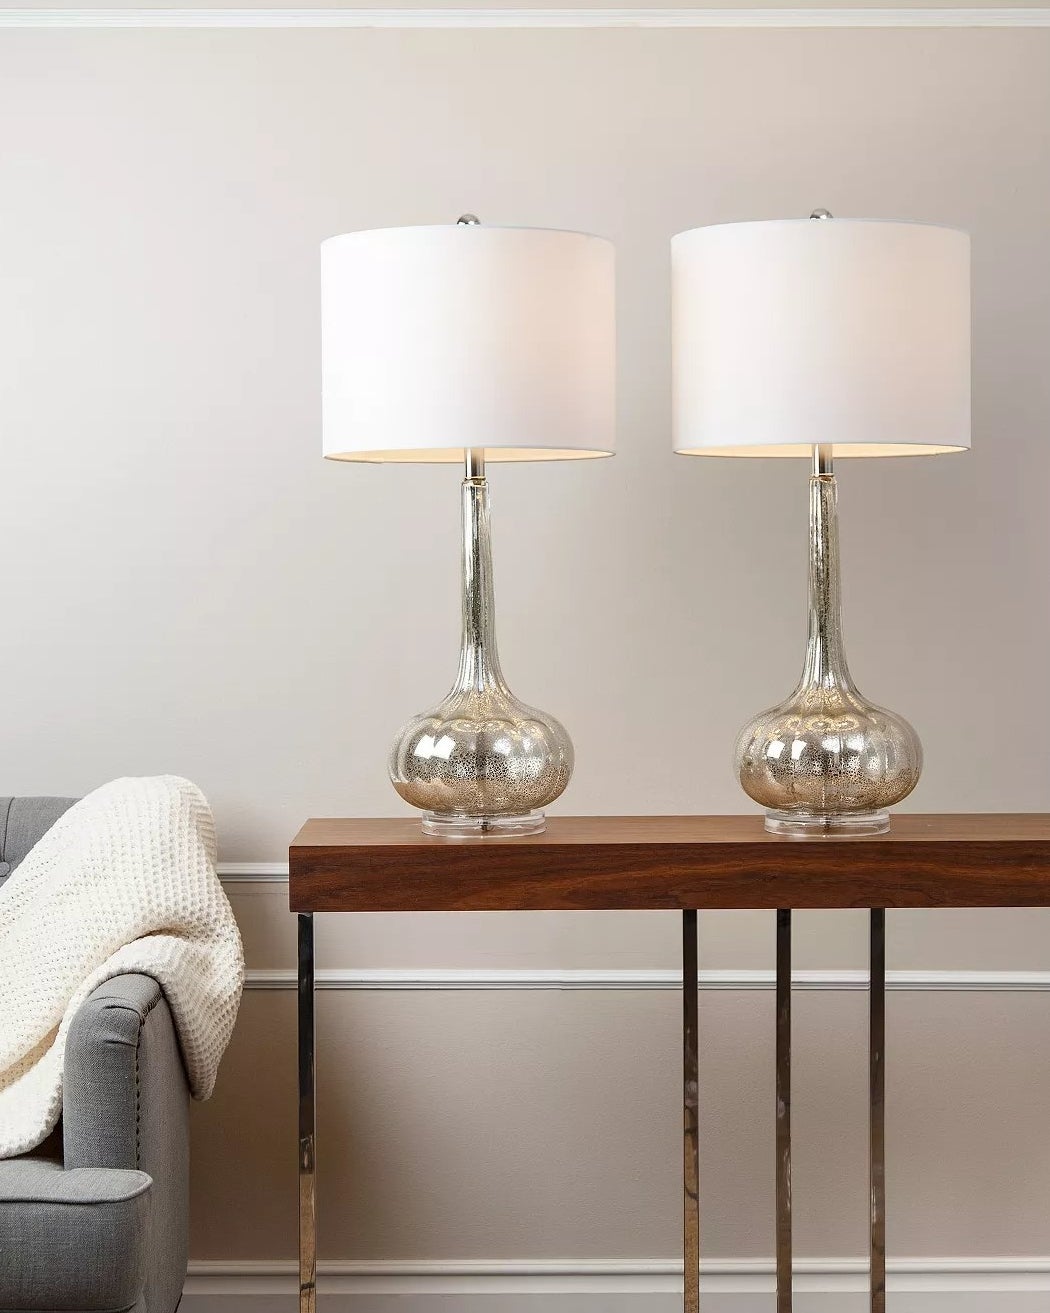 Silver, antiqued table lamps